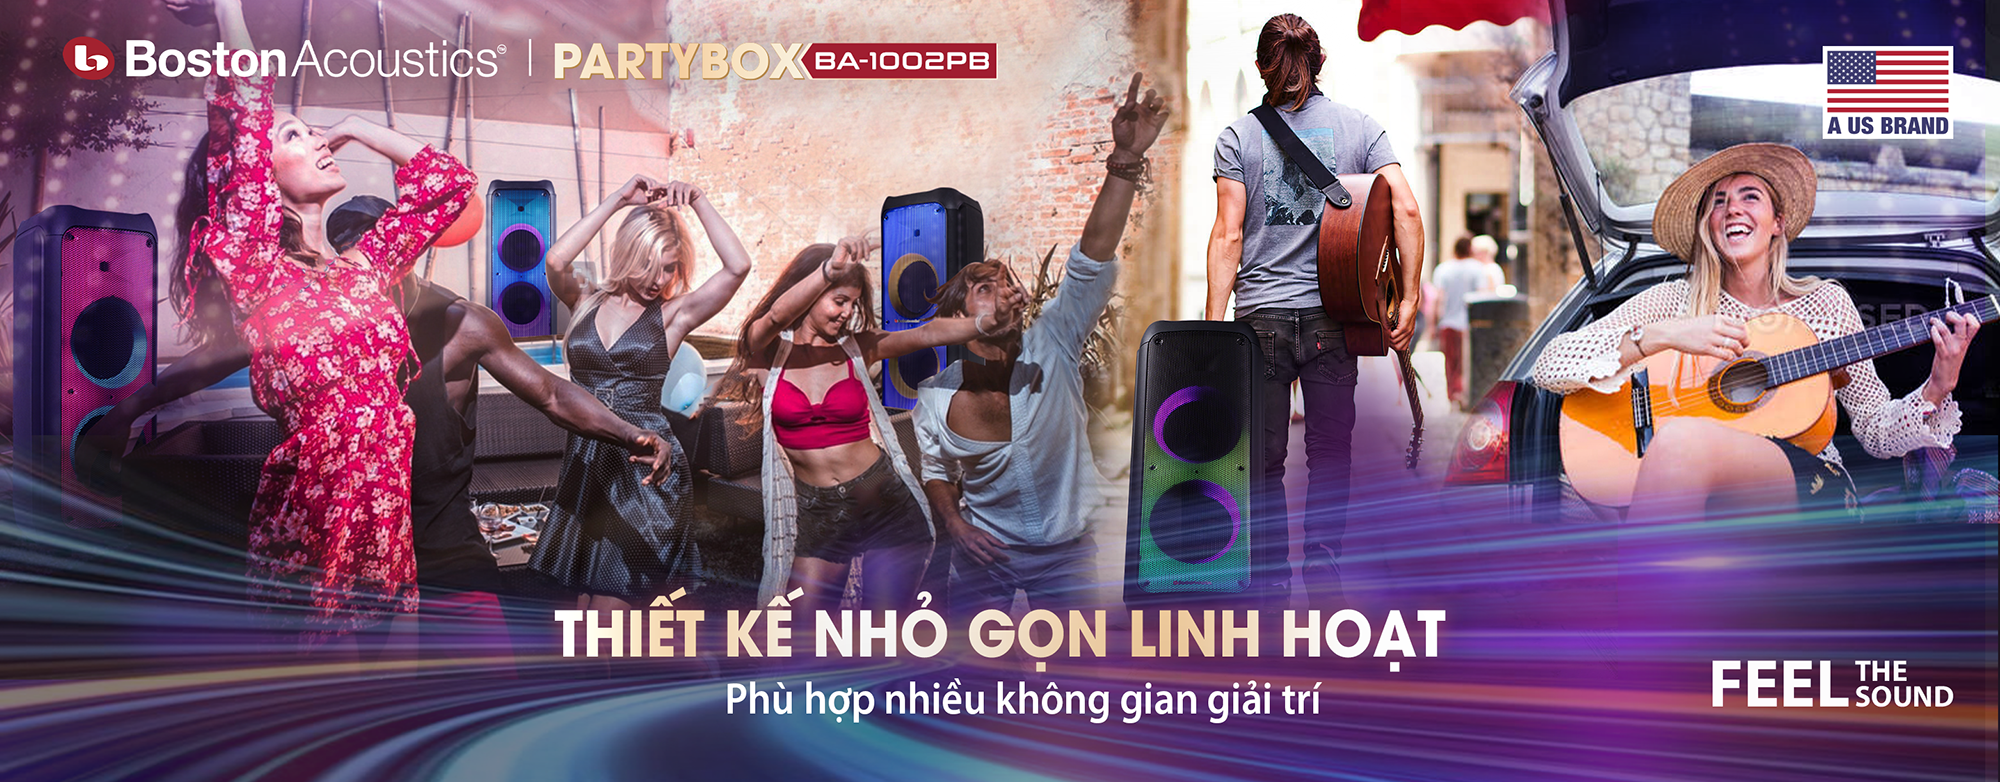 PARTYBOX BA-1002PB | Anh Duy Audio